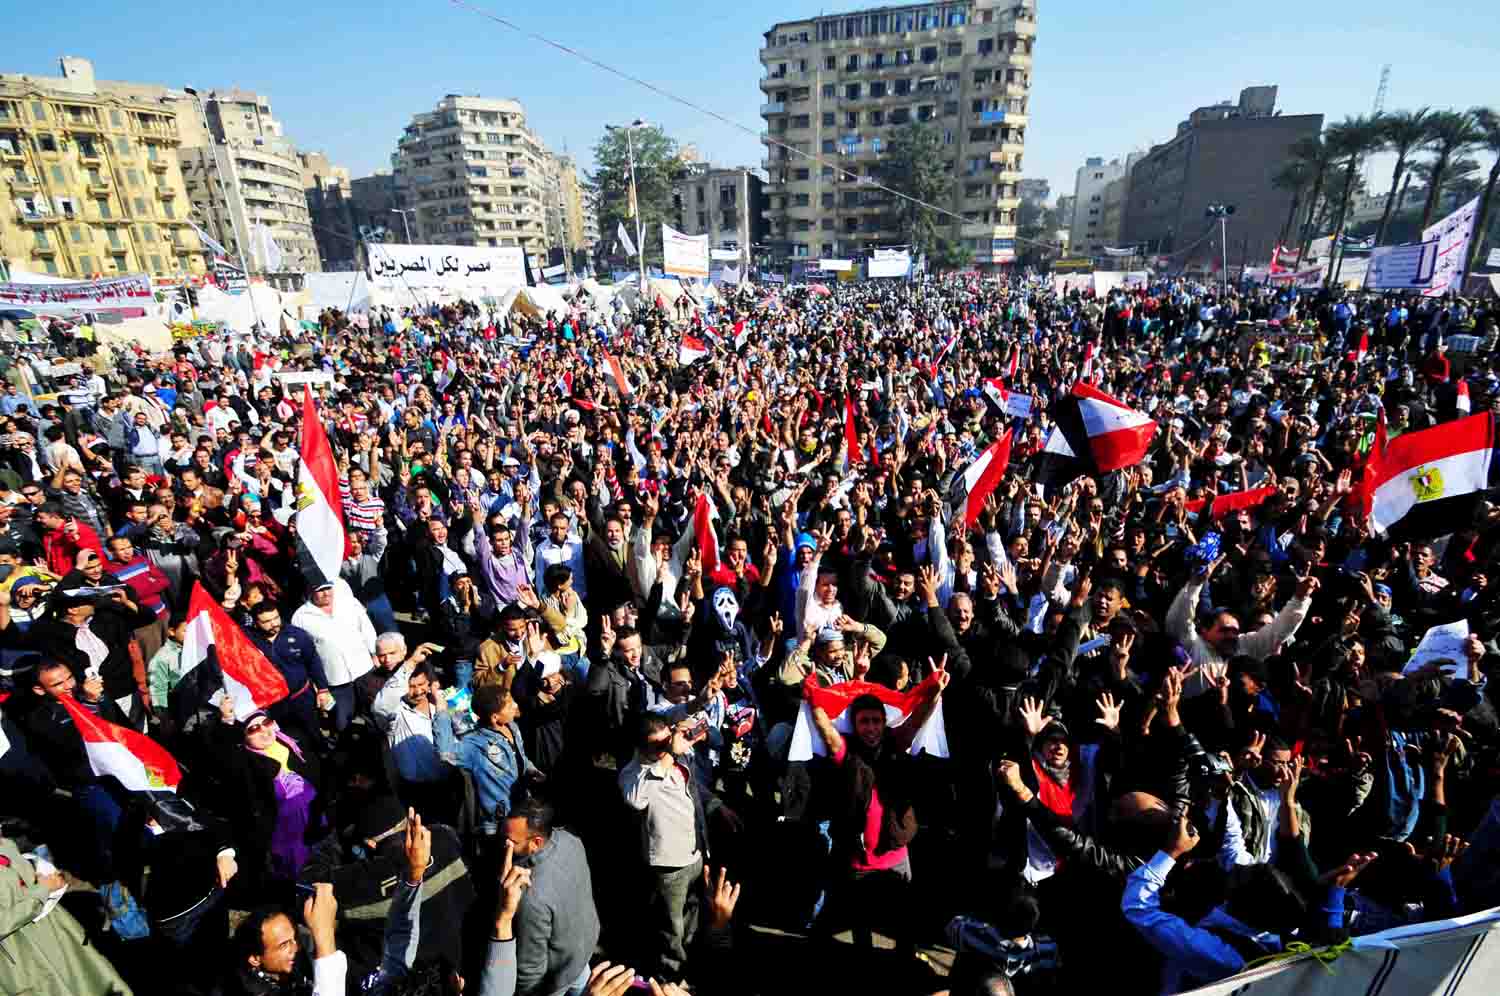 Thousands gather in Tahrir square for protests against President Morsy's recent constitutional declaration Photo by Hassan Ibrahim